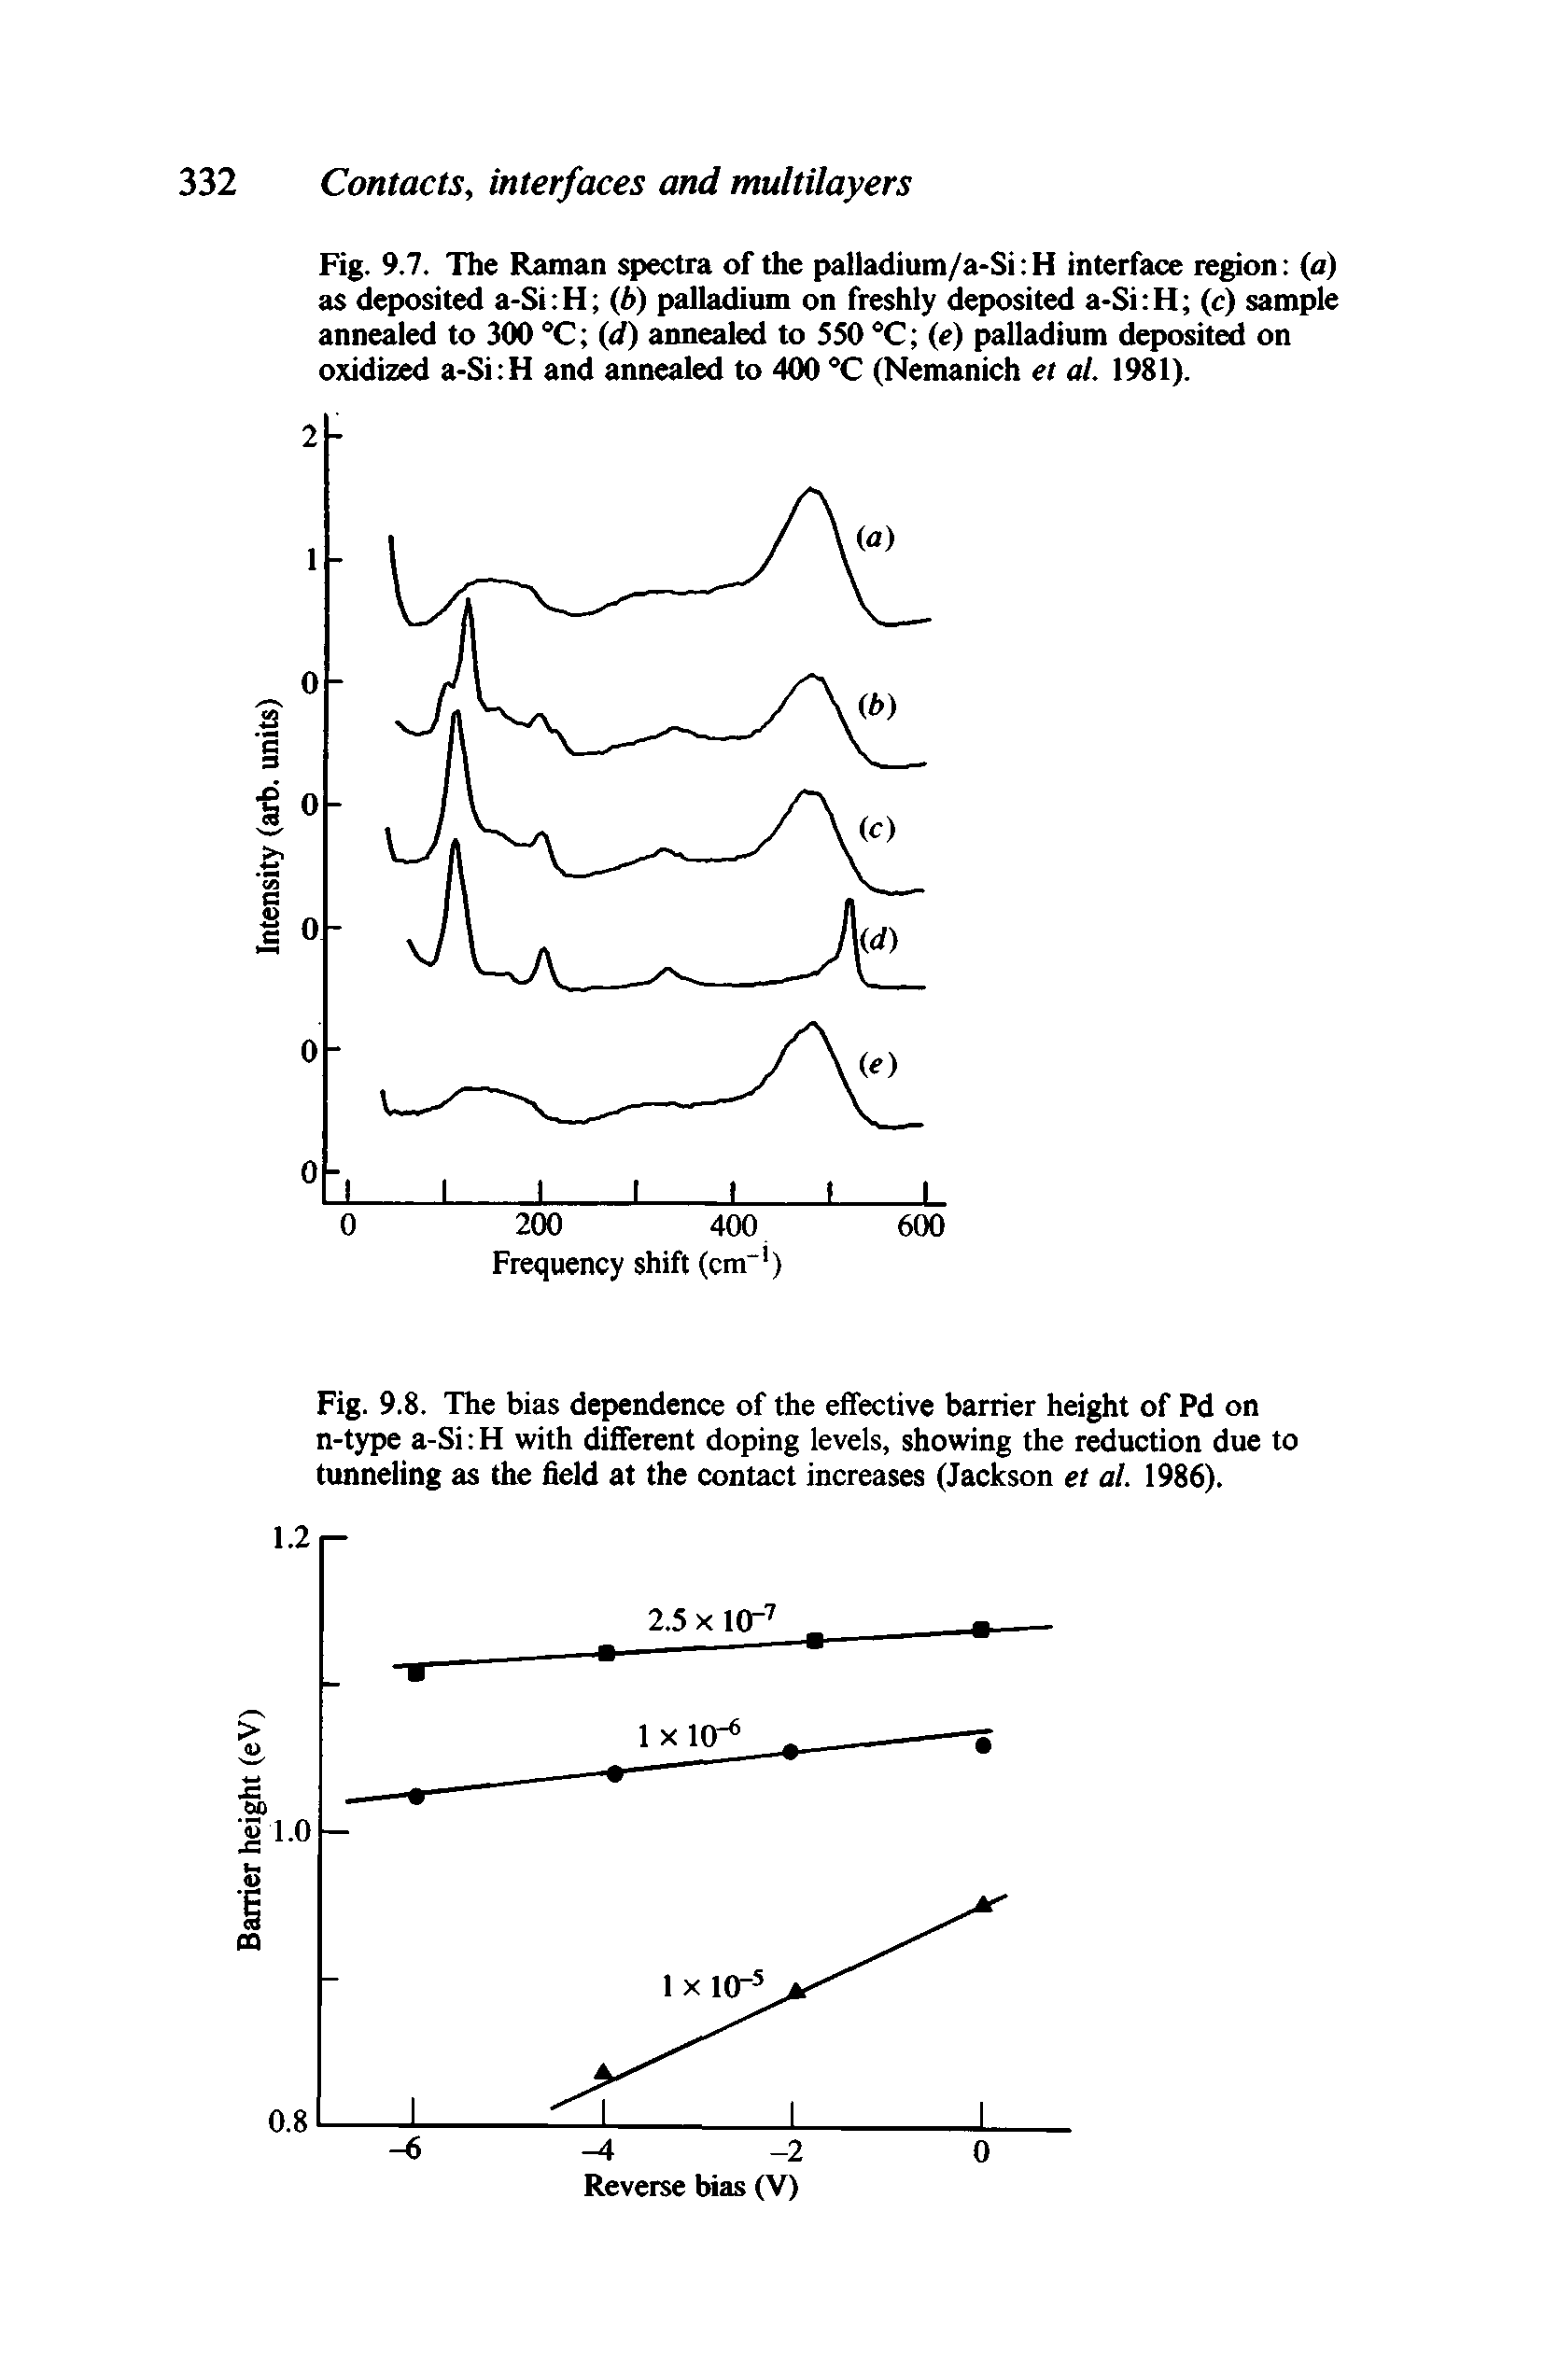 Fig. 9.8. The bias dependence of the effective barrier height of Pd on n-type a-Si H with different doping levels, showing the reduction due to tunneling as the field at the contact increases (Jackson et al. 1986).